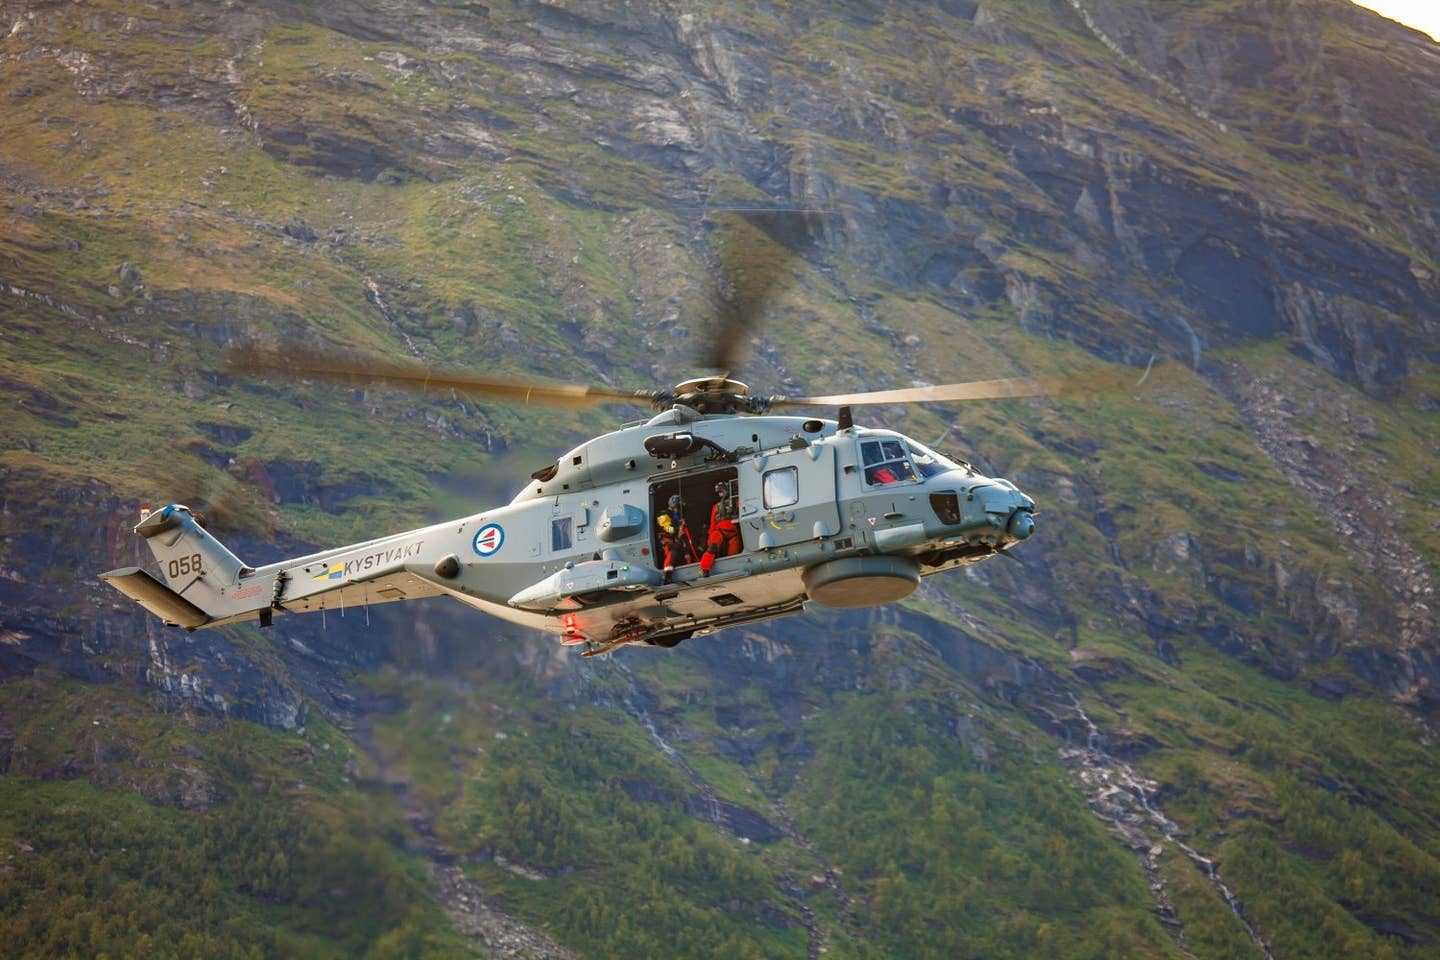 Norway's NH90 fleet averages 700 flight hours per year, far short of the 3,900 hours required. <em>NHI</em>